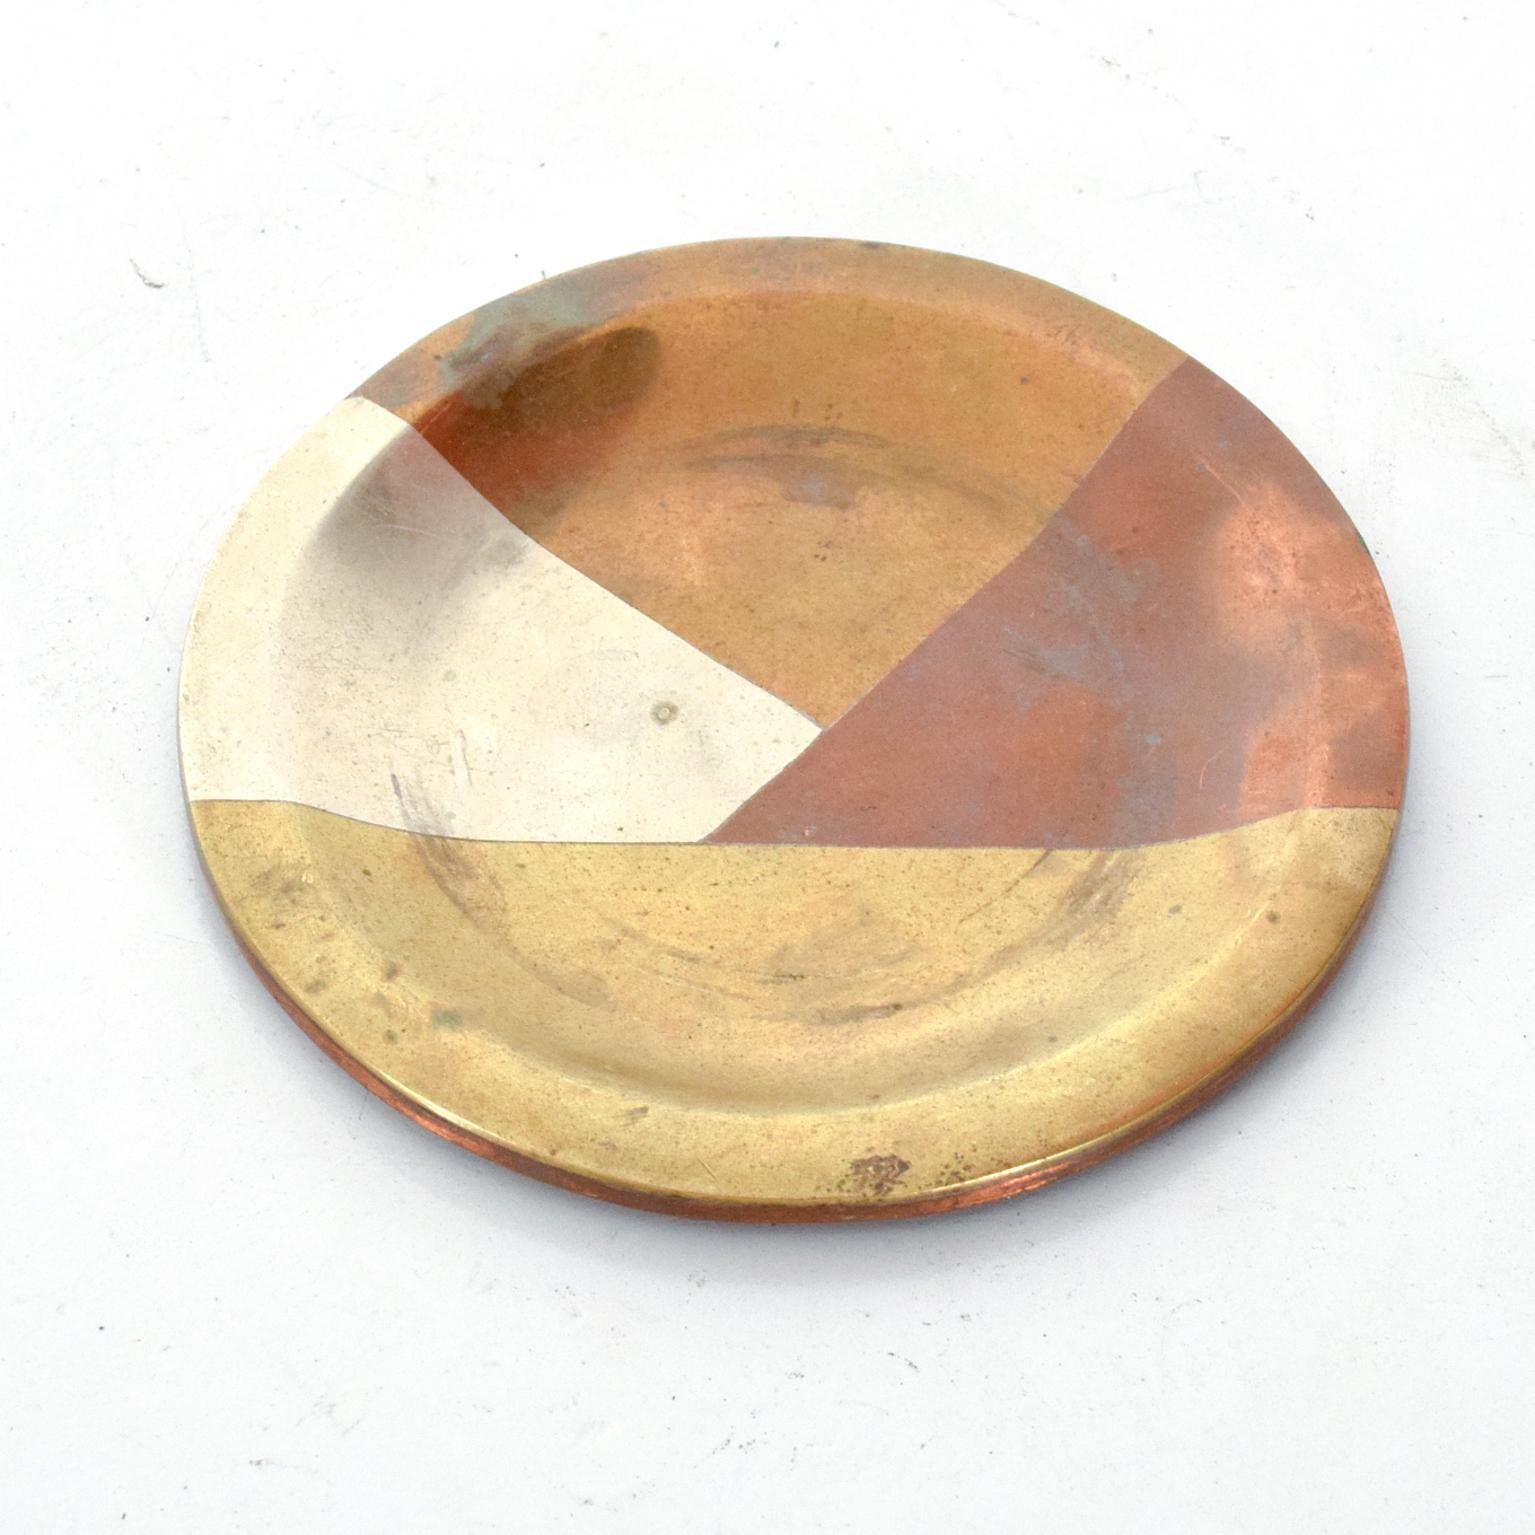 For your consideration: a small decorative dish by Los Castillo. Married metals design. Brass, Copper, Stainless steel. Round shape. Stamped on the backside. 
Los Castillo Mexico circa 1960s.
Dimensions: 4 3/16